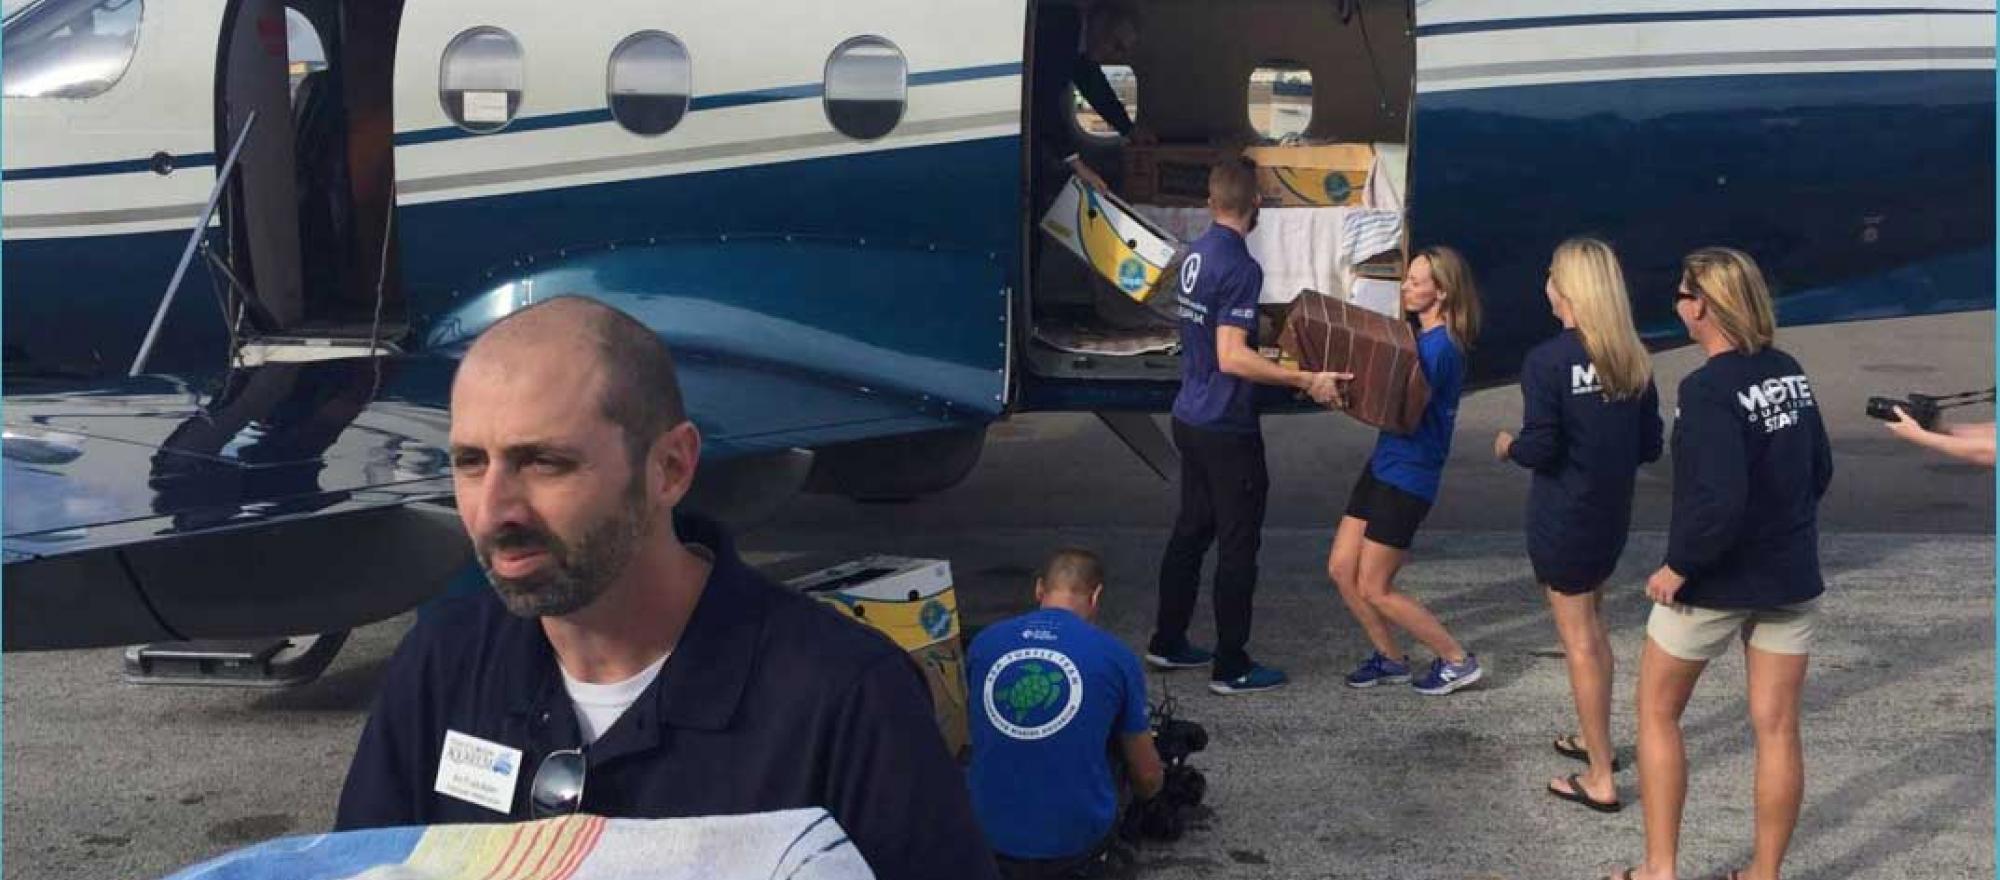 Animal care technicians unloading sea turtles from turboprop